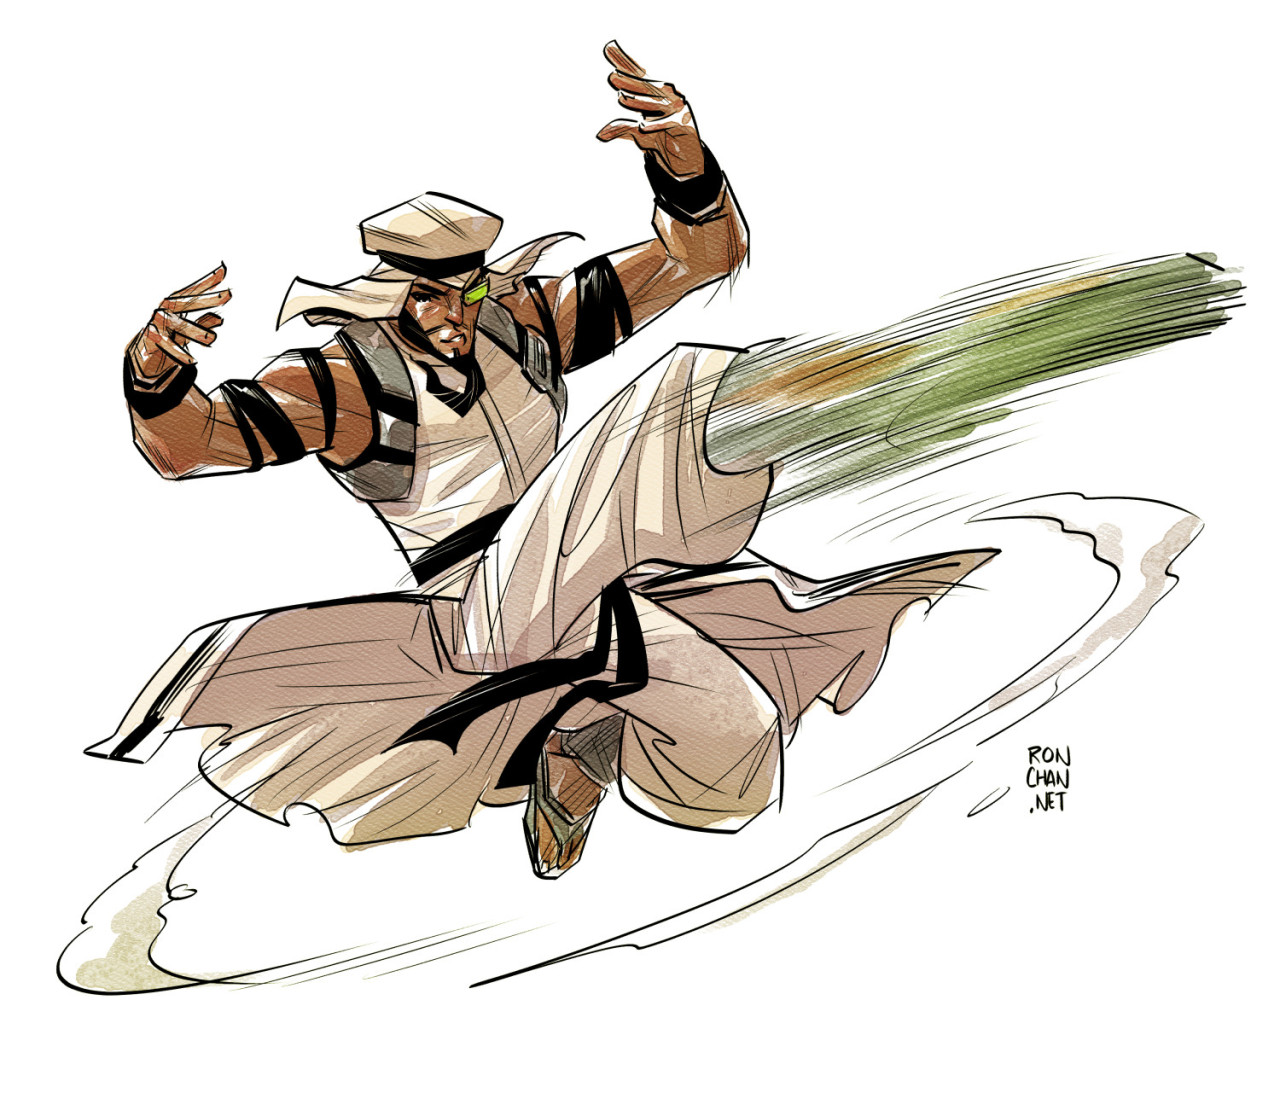 Sketch of Rashid, from Street Fighter V! Still learning to draw with my Lenovo Miix 700. The pressure feels great, but I’m having a hard to being very precise with it, so I thought I’d stick to loose...